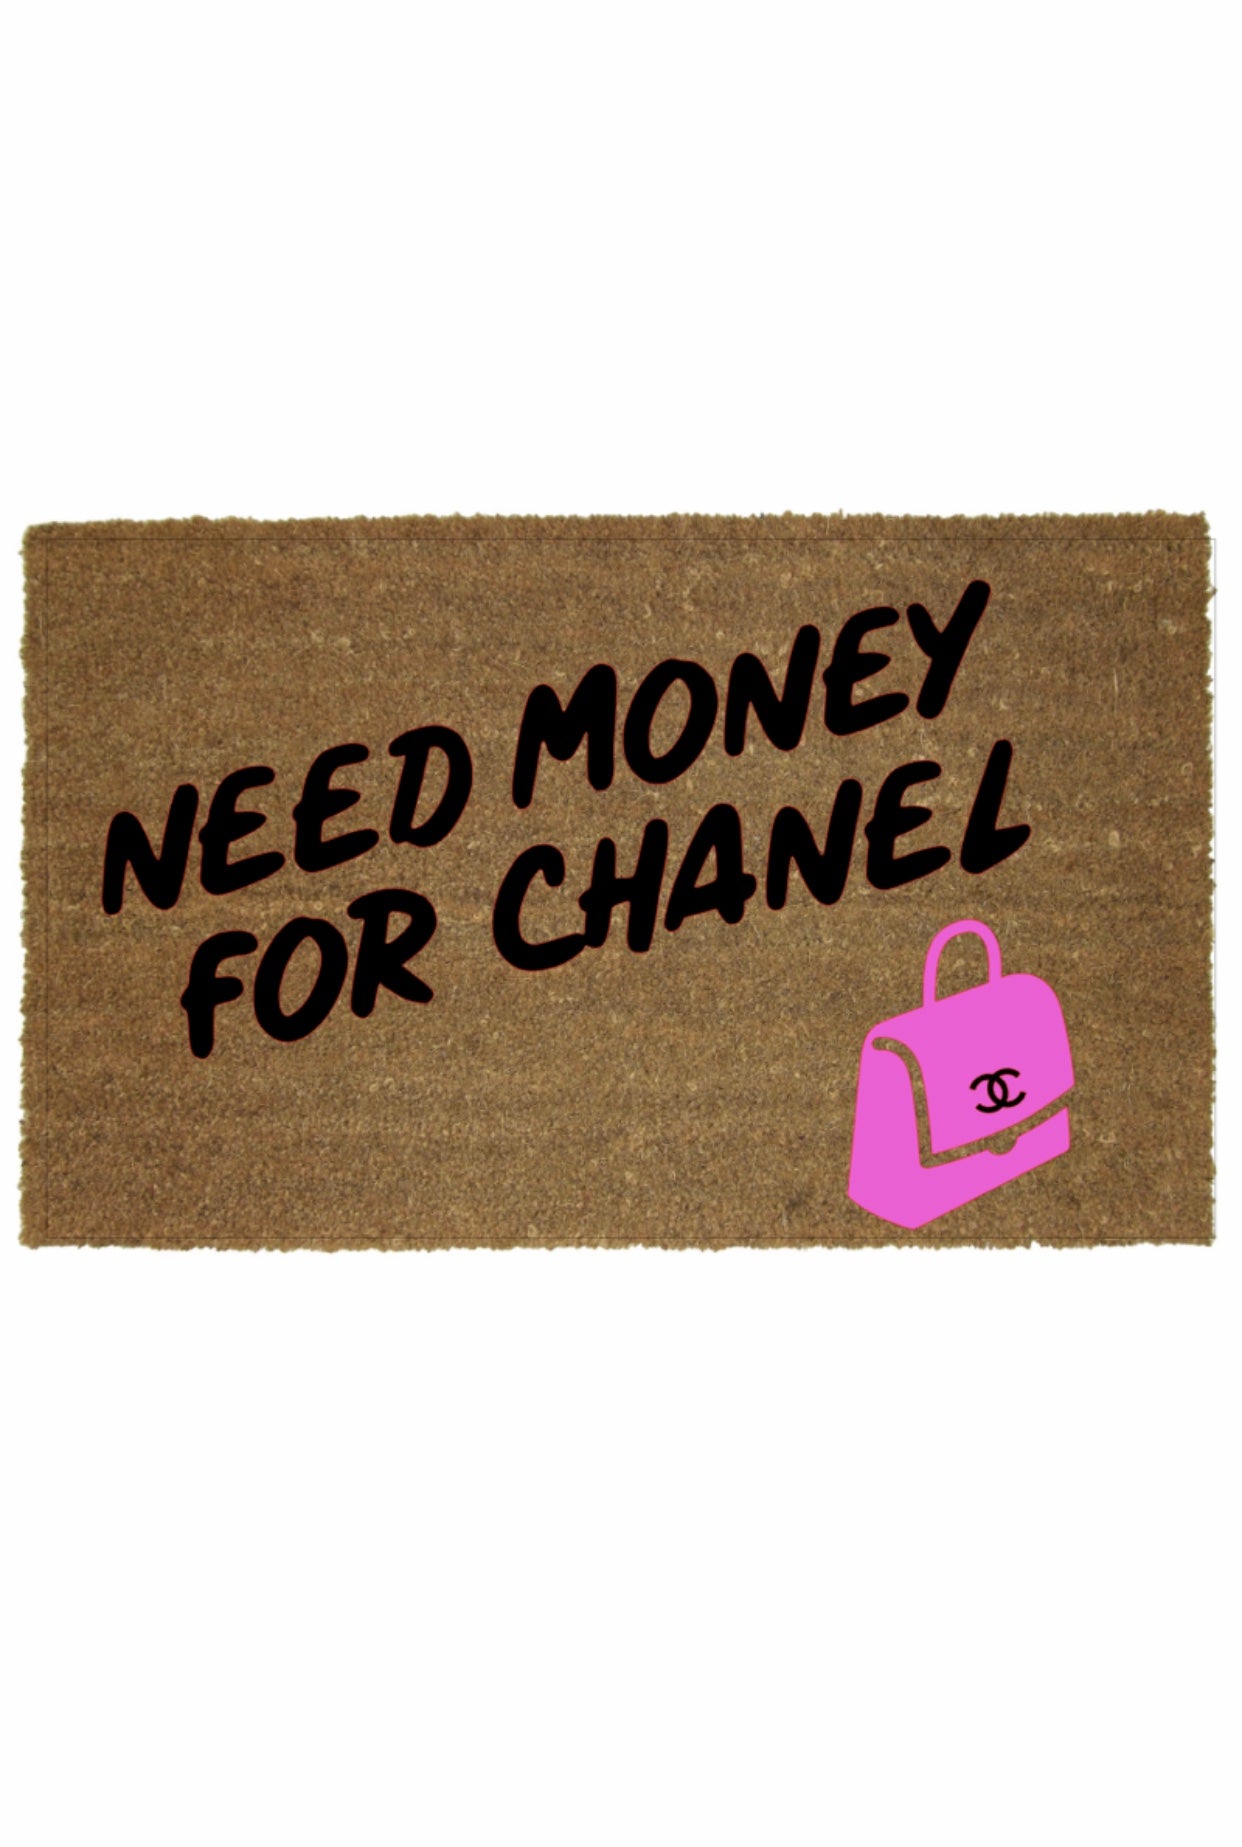 Bags  Need Money For Chanel Accessory Pouch  Poshmark